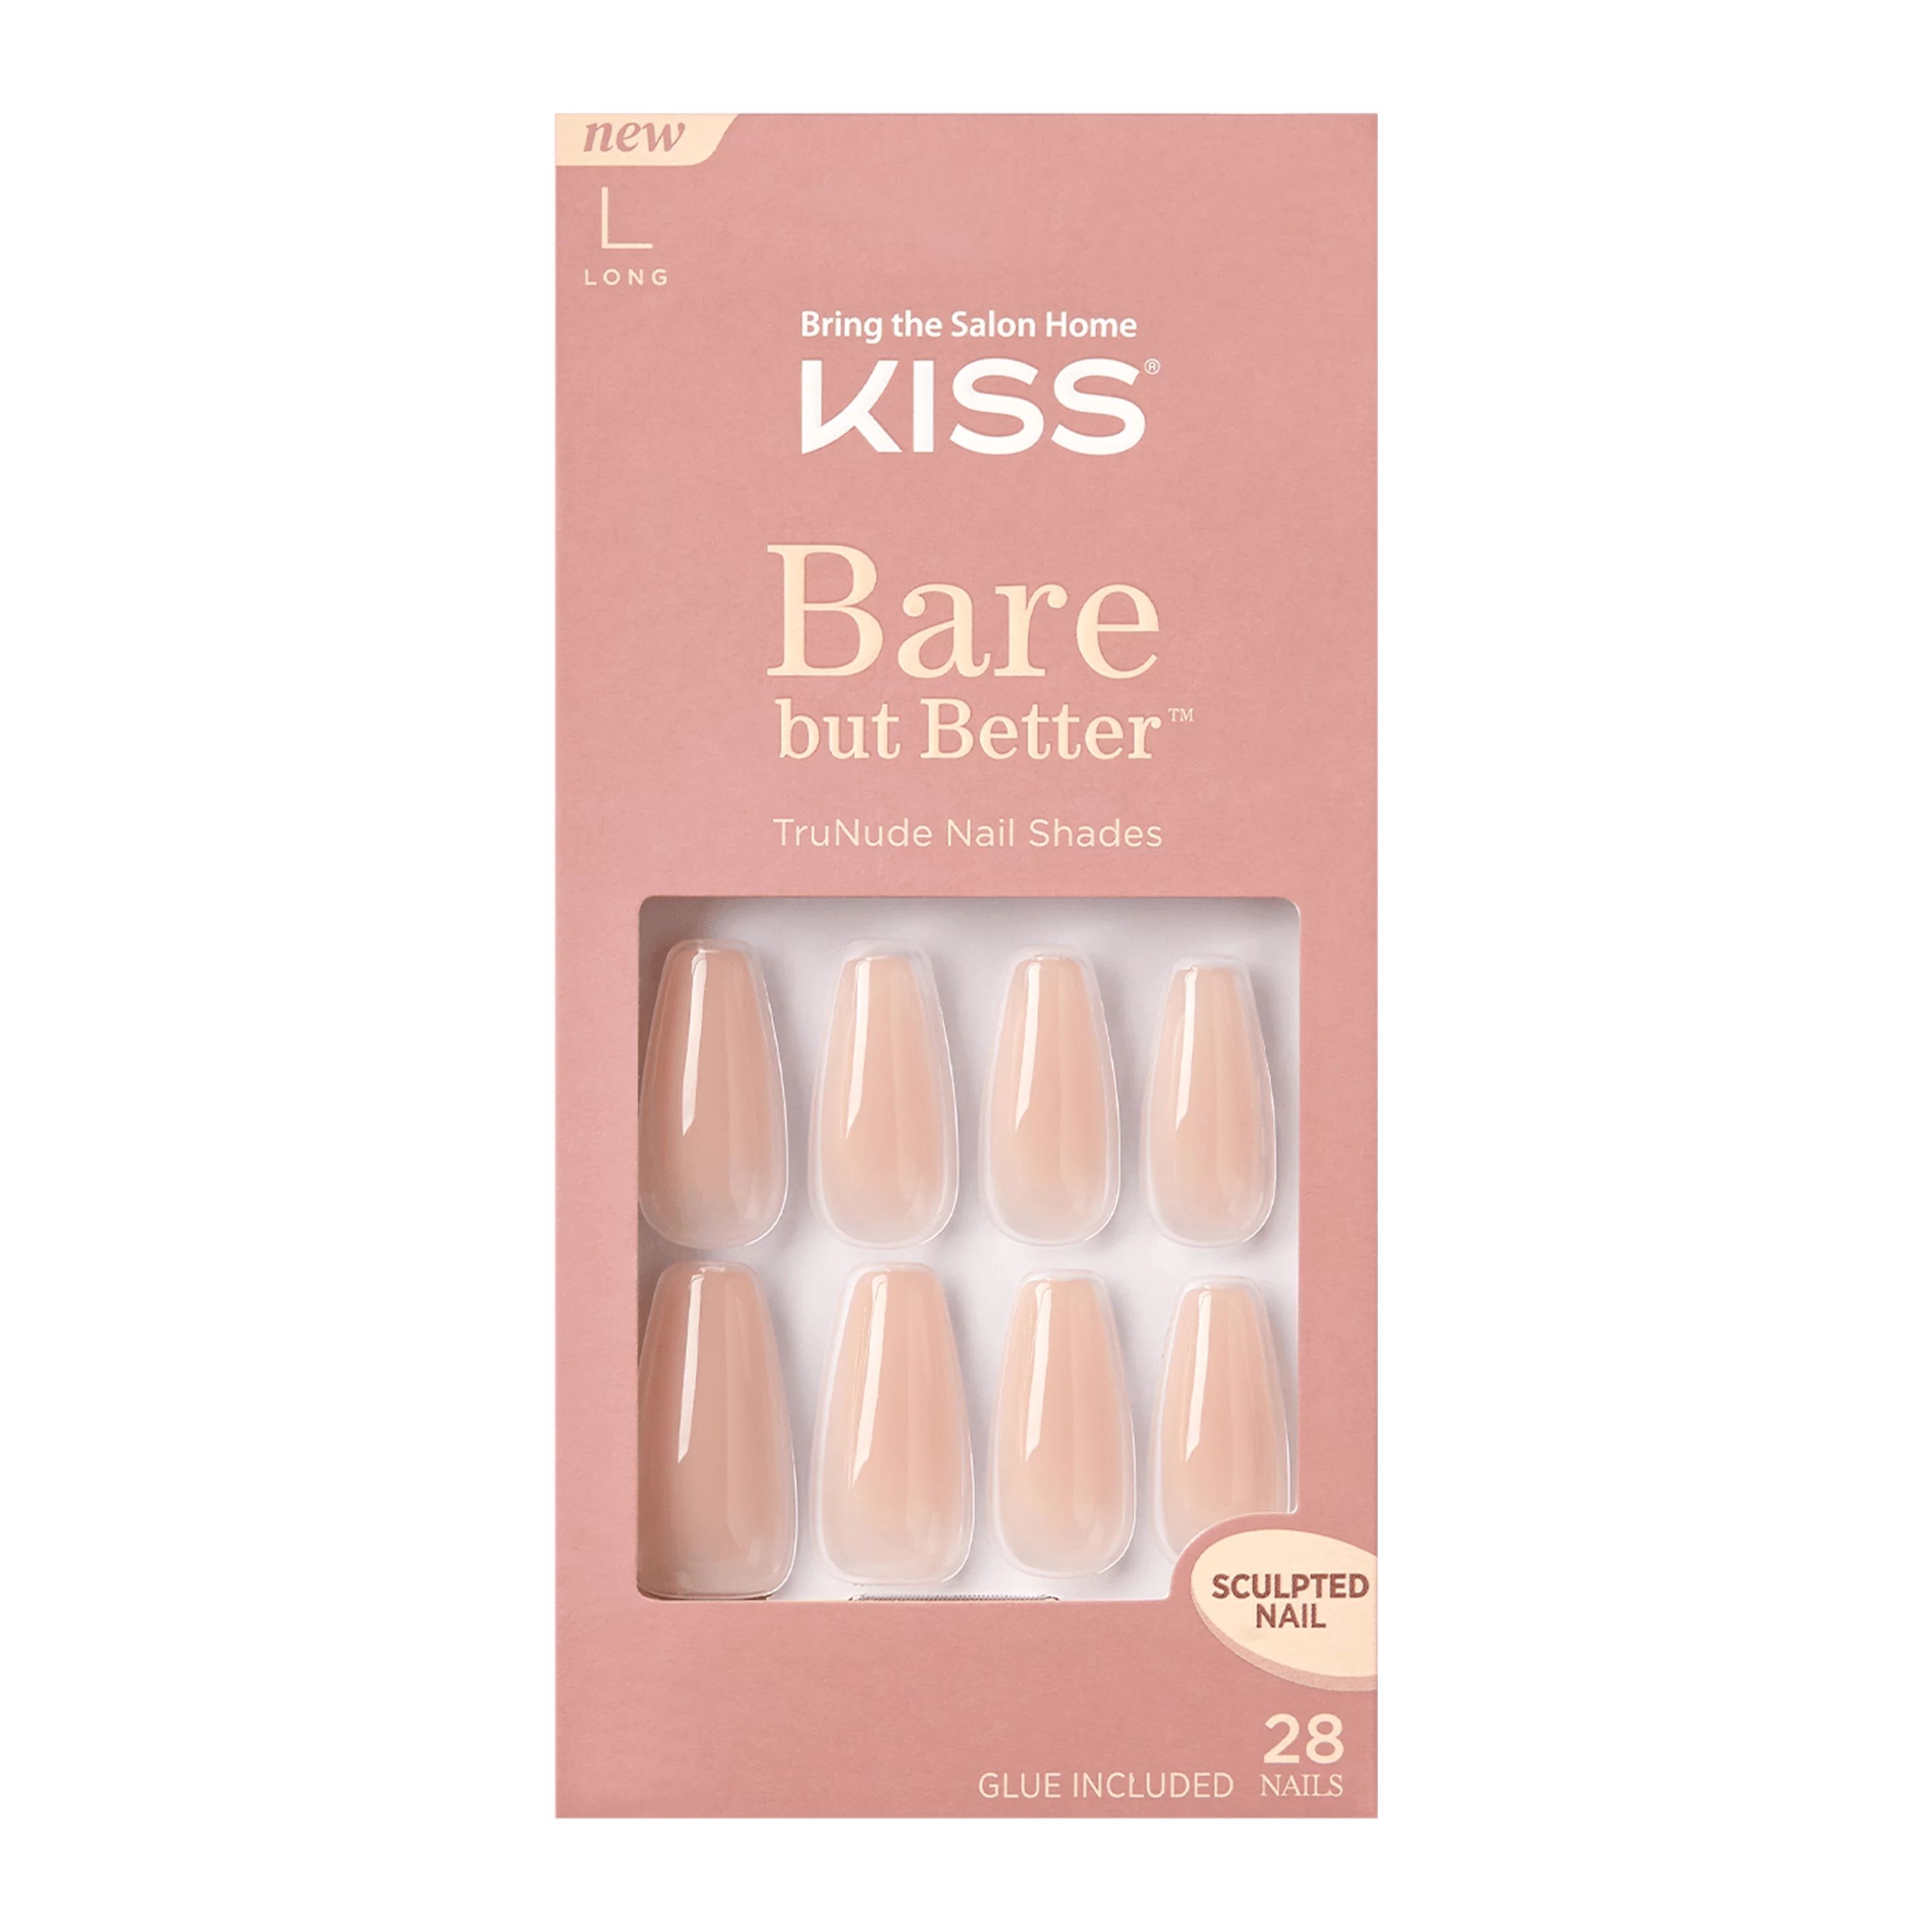 KISS Bare but Better Sculpted Nude Fake Nails, Nude Drama, 28 Count | Walmart (US)